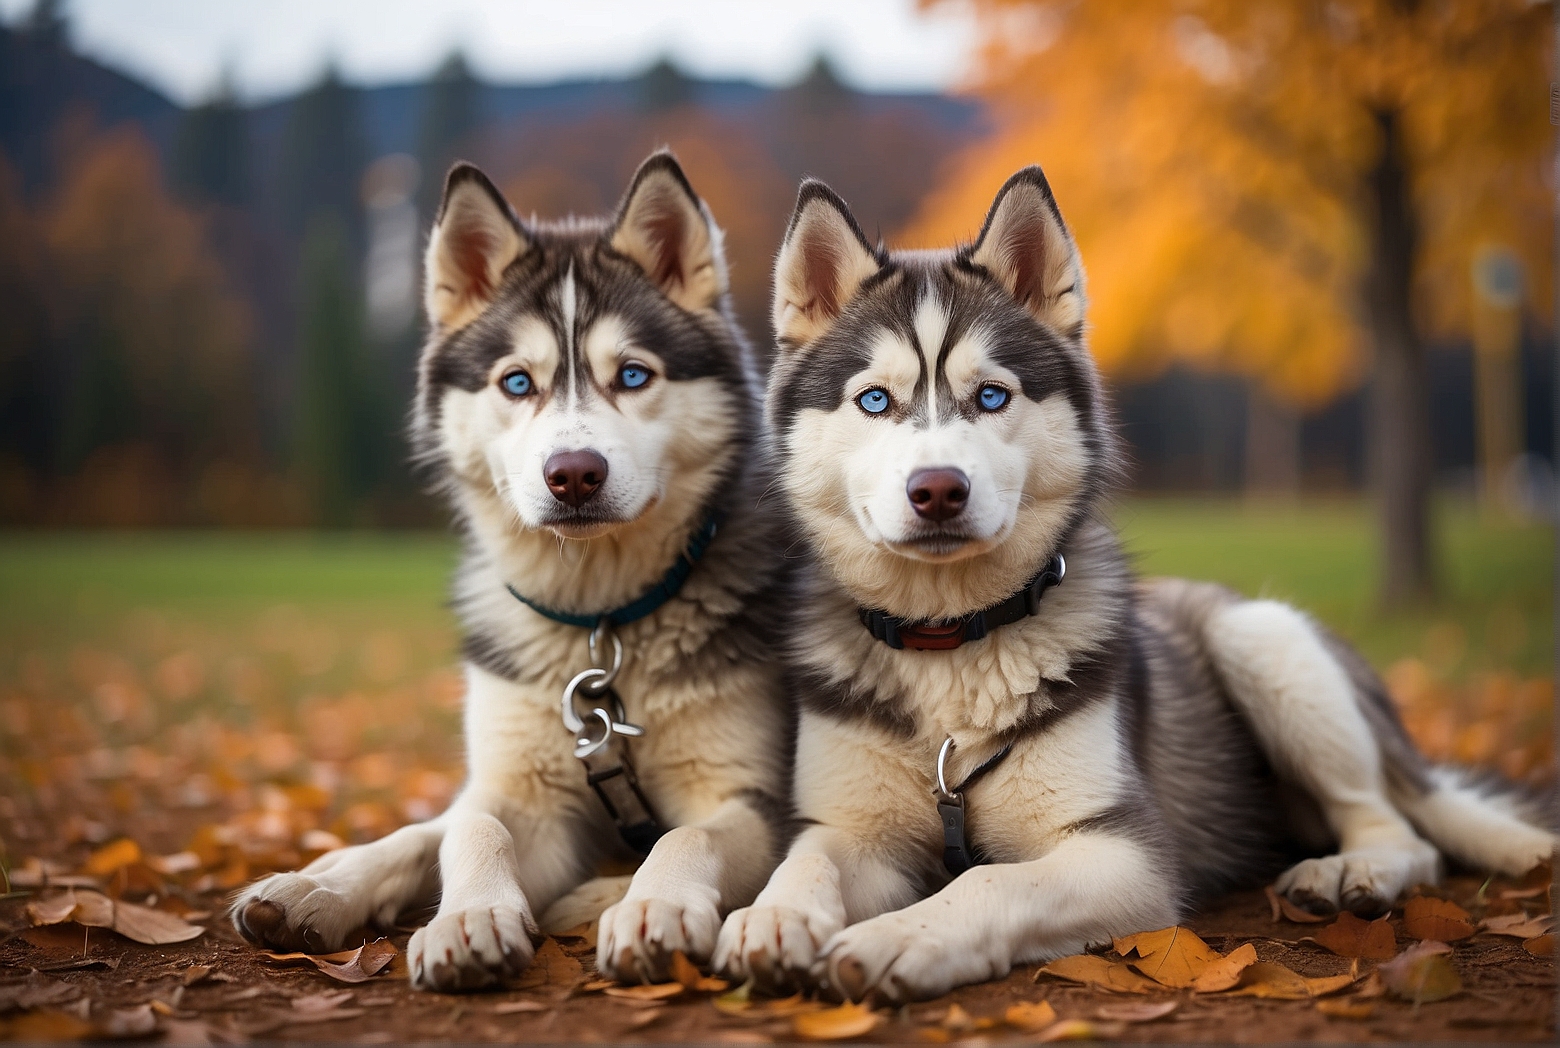 Common Causes of Limping in Siberian Huskies